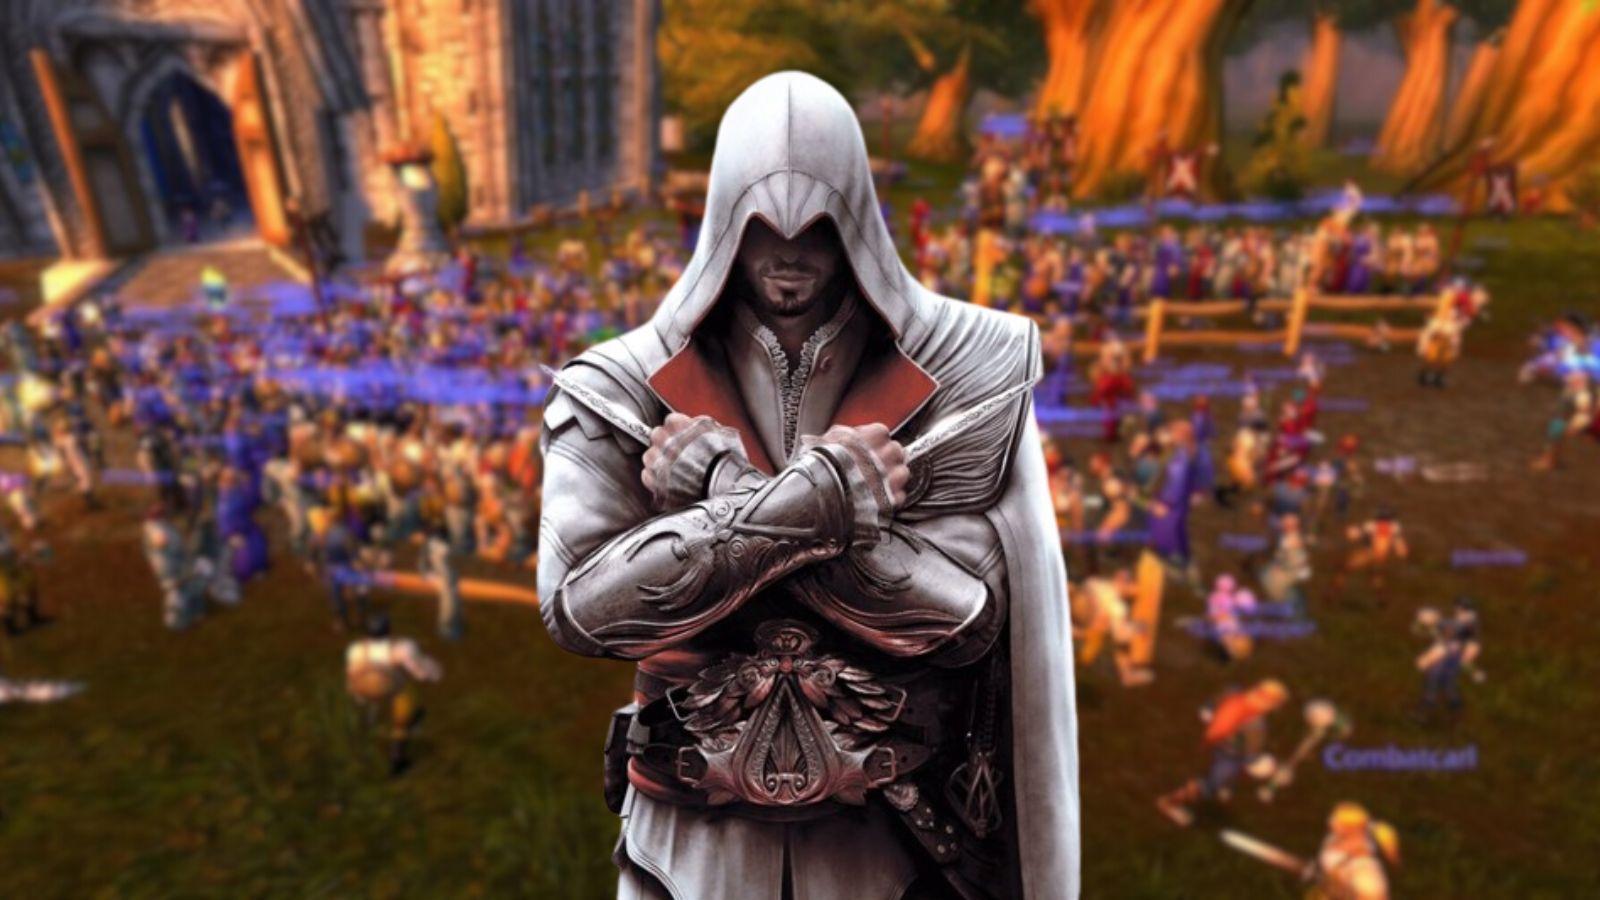 Ezio stands before a background of Season of Discovery players